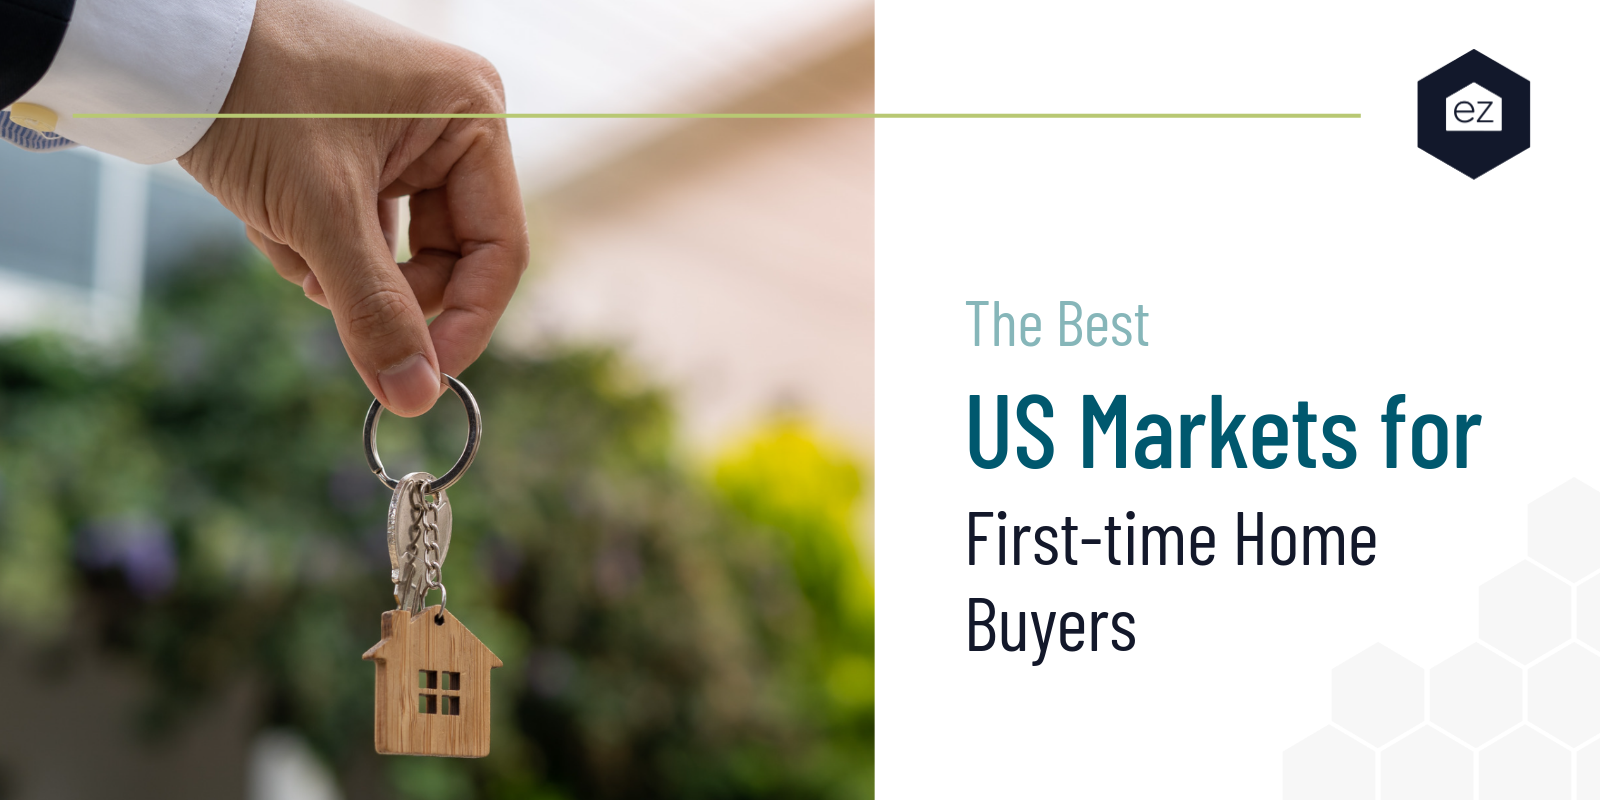 First-time Home Buyers